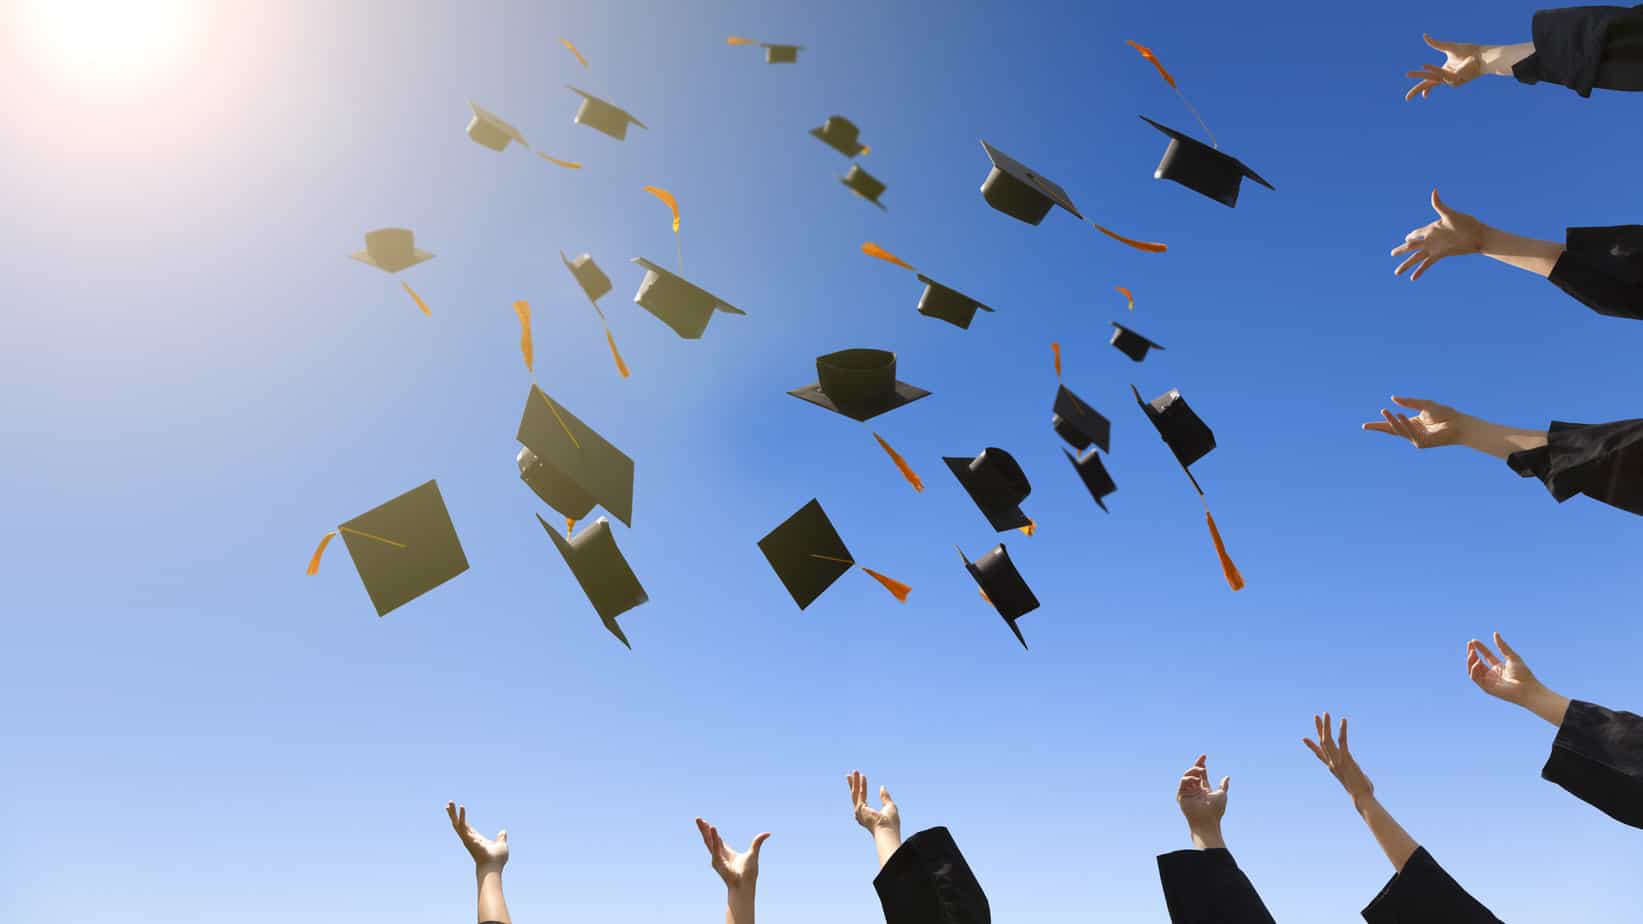 Article: The Best Backpack for Grad School Image: Grads throwing hats in the air